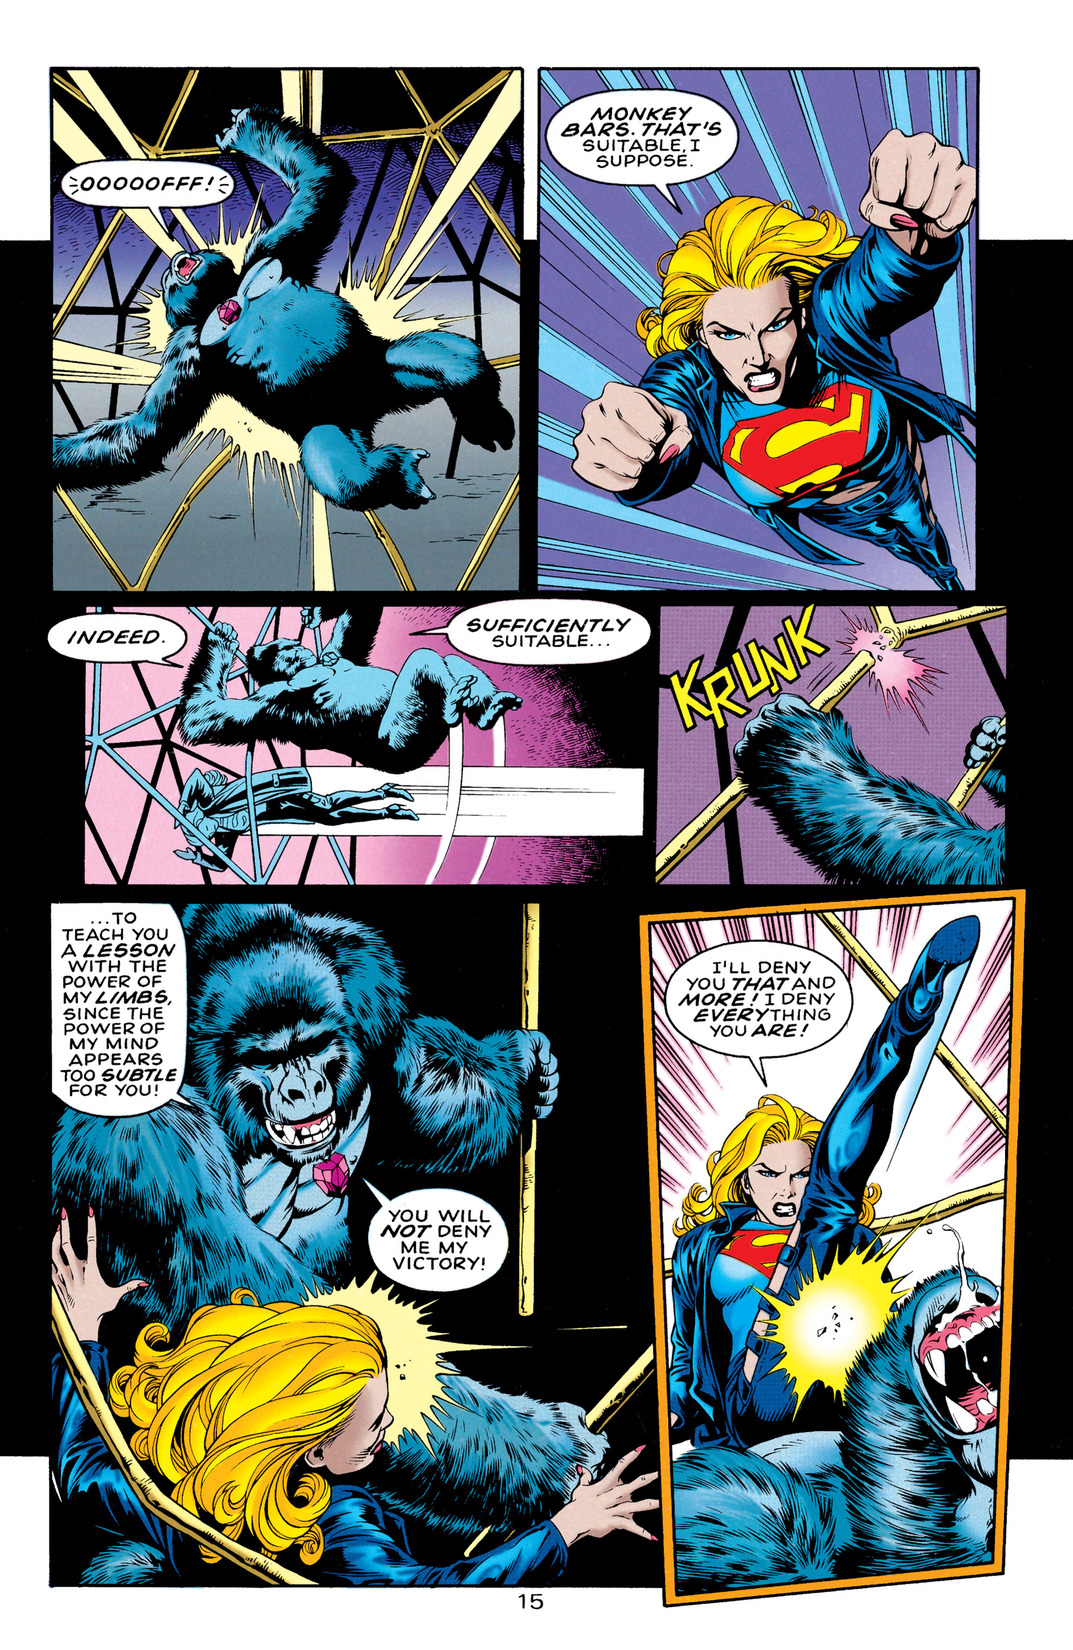 Supergirl (1996) 4 Page 15